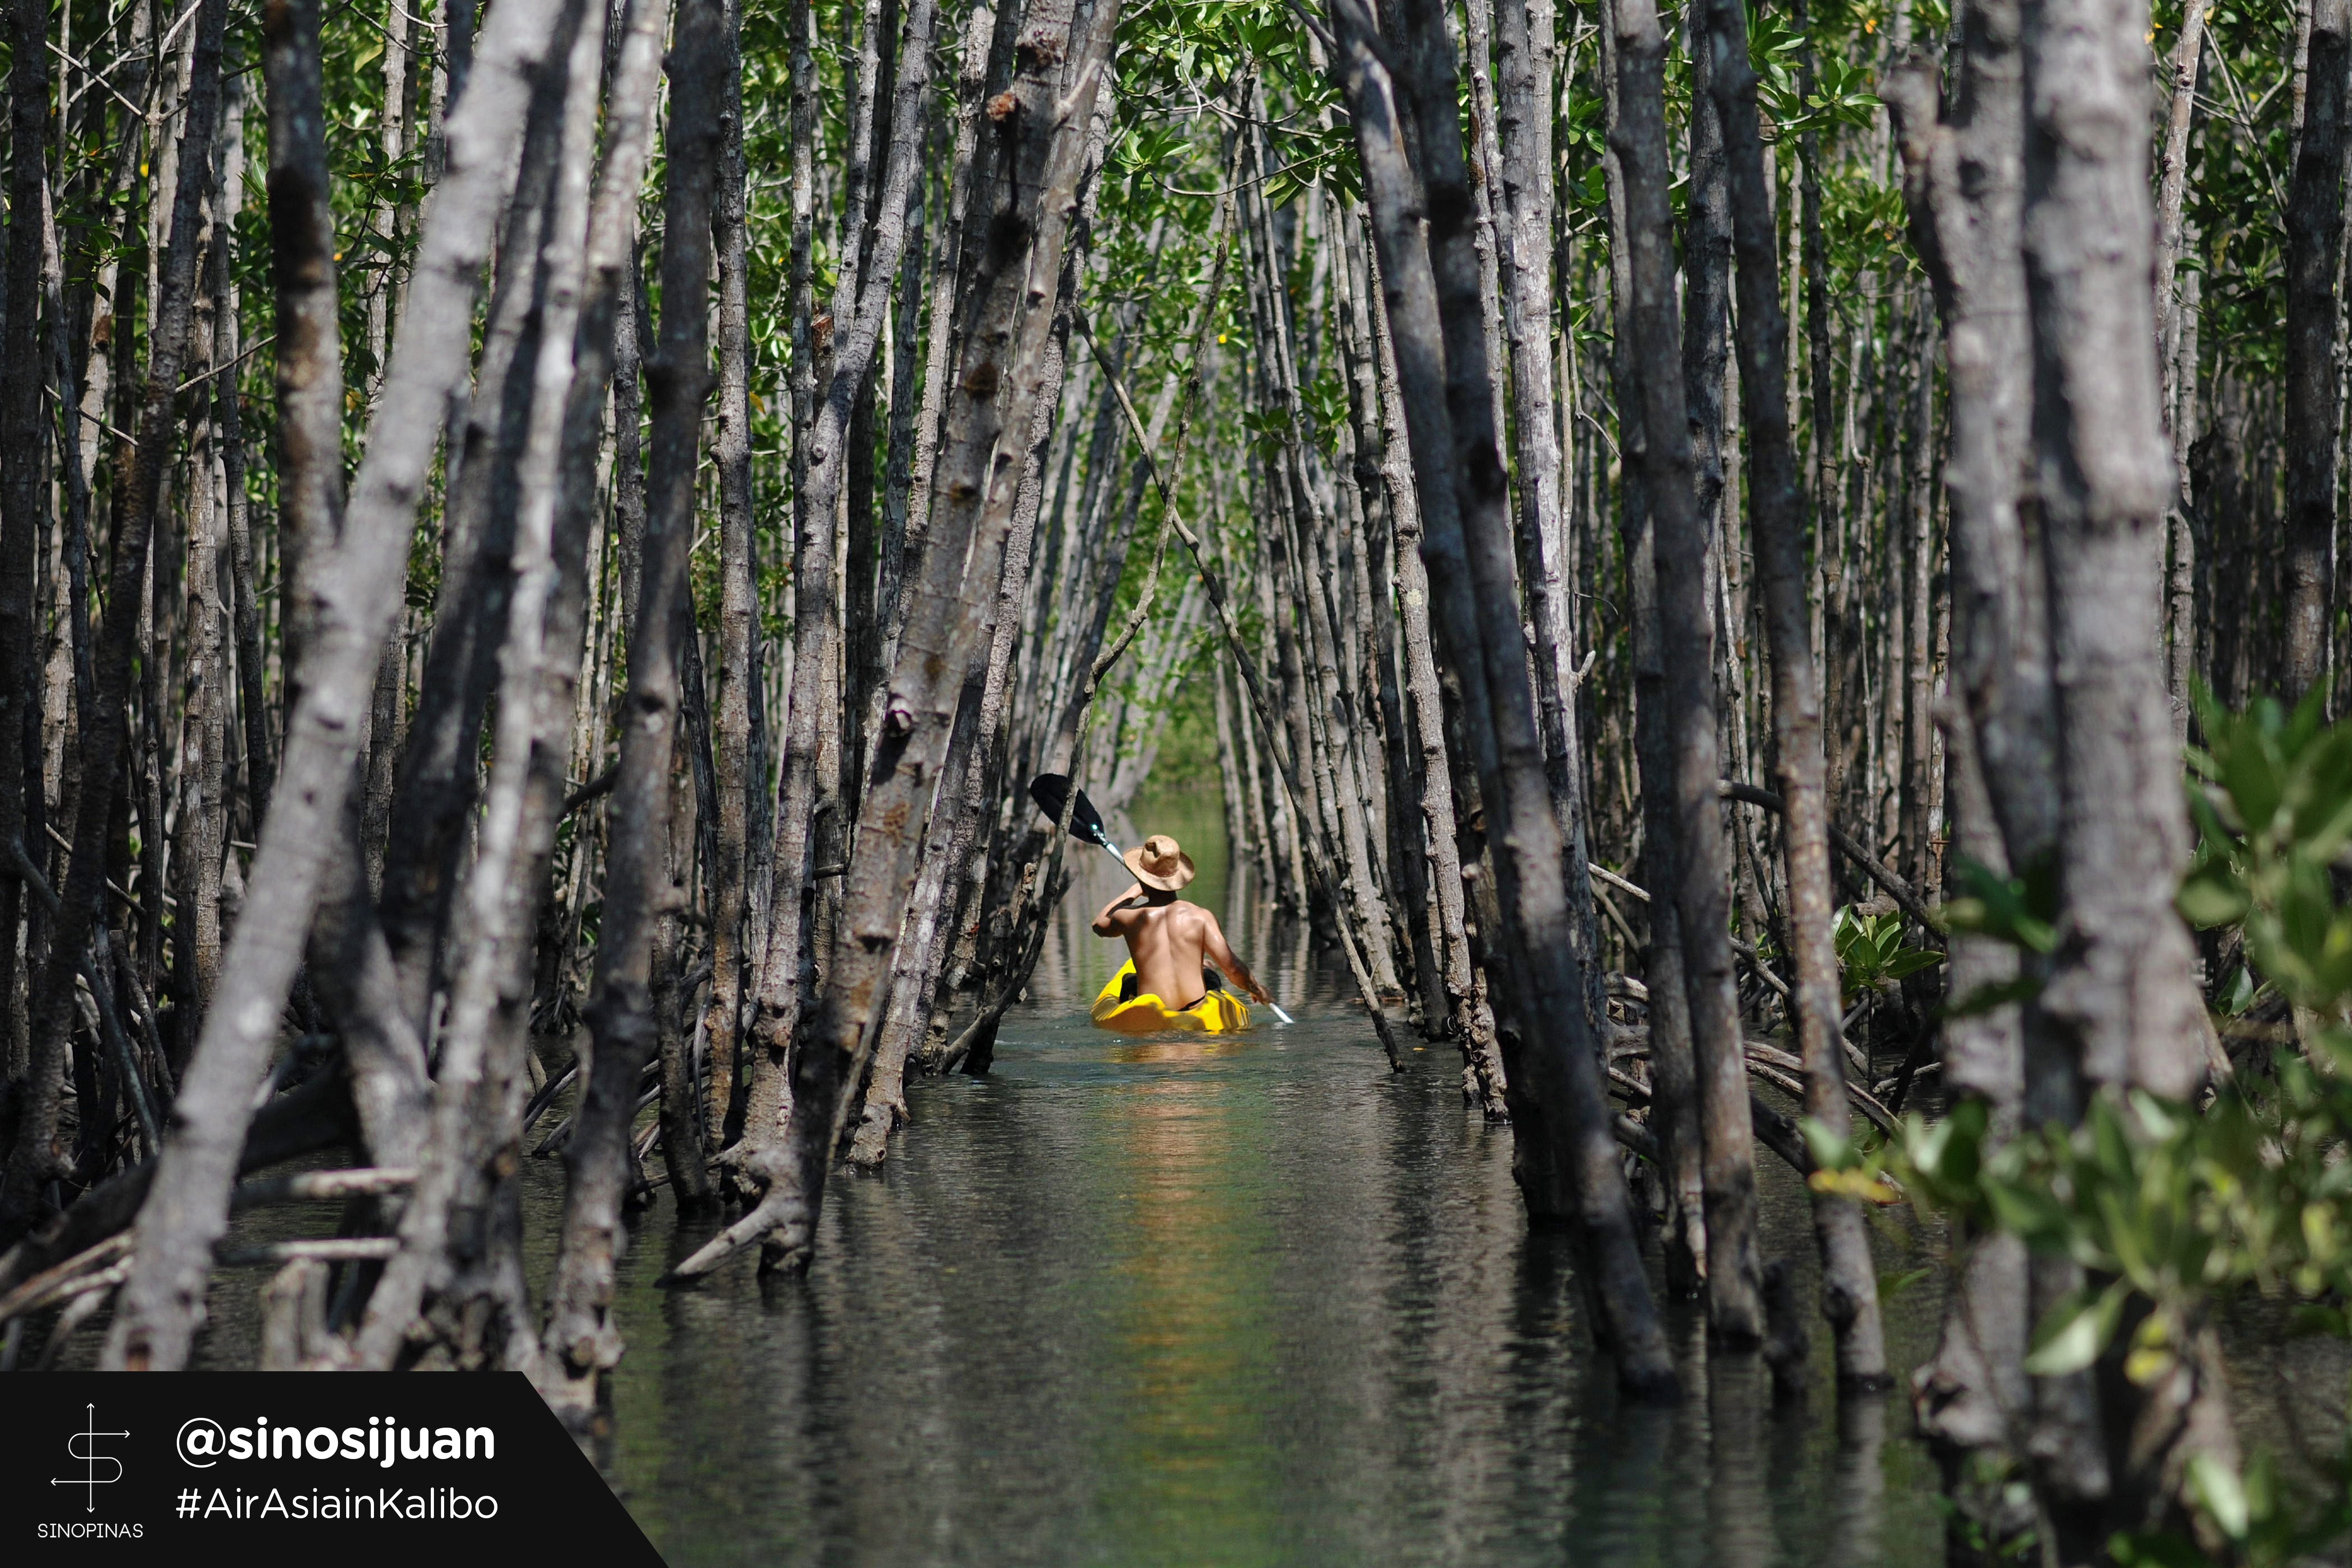 KAYAK. Between some mangroves are creeks like this perfect for kayaking. Photo by Alexis Lim courtesy of AirAsia 